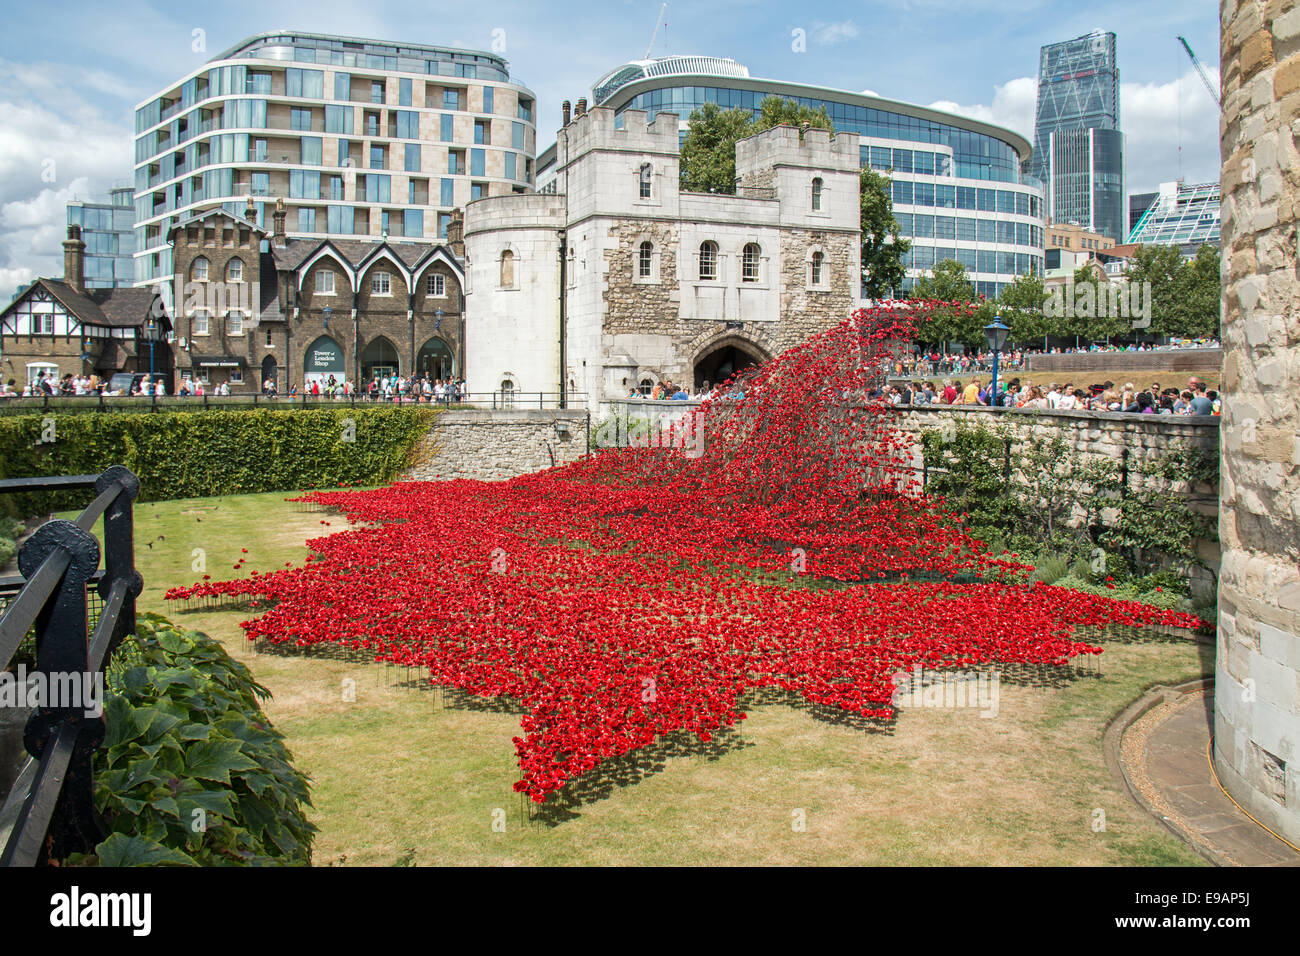 Tower of London display of ceramic poppies commemorating the fallen and centenary of the start of the First World War. Stock Photo